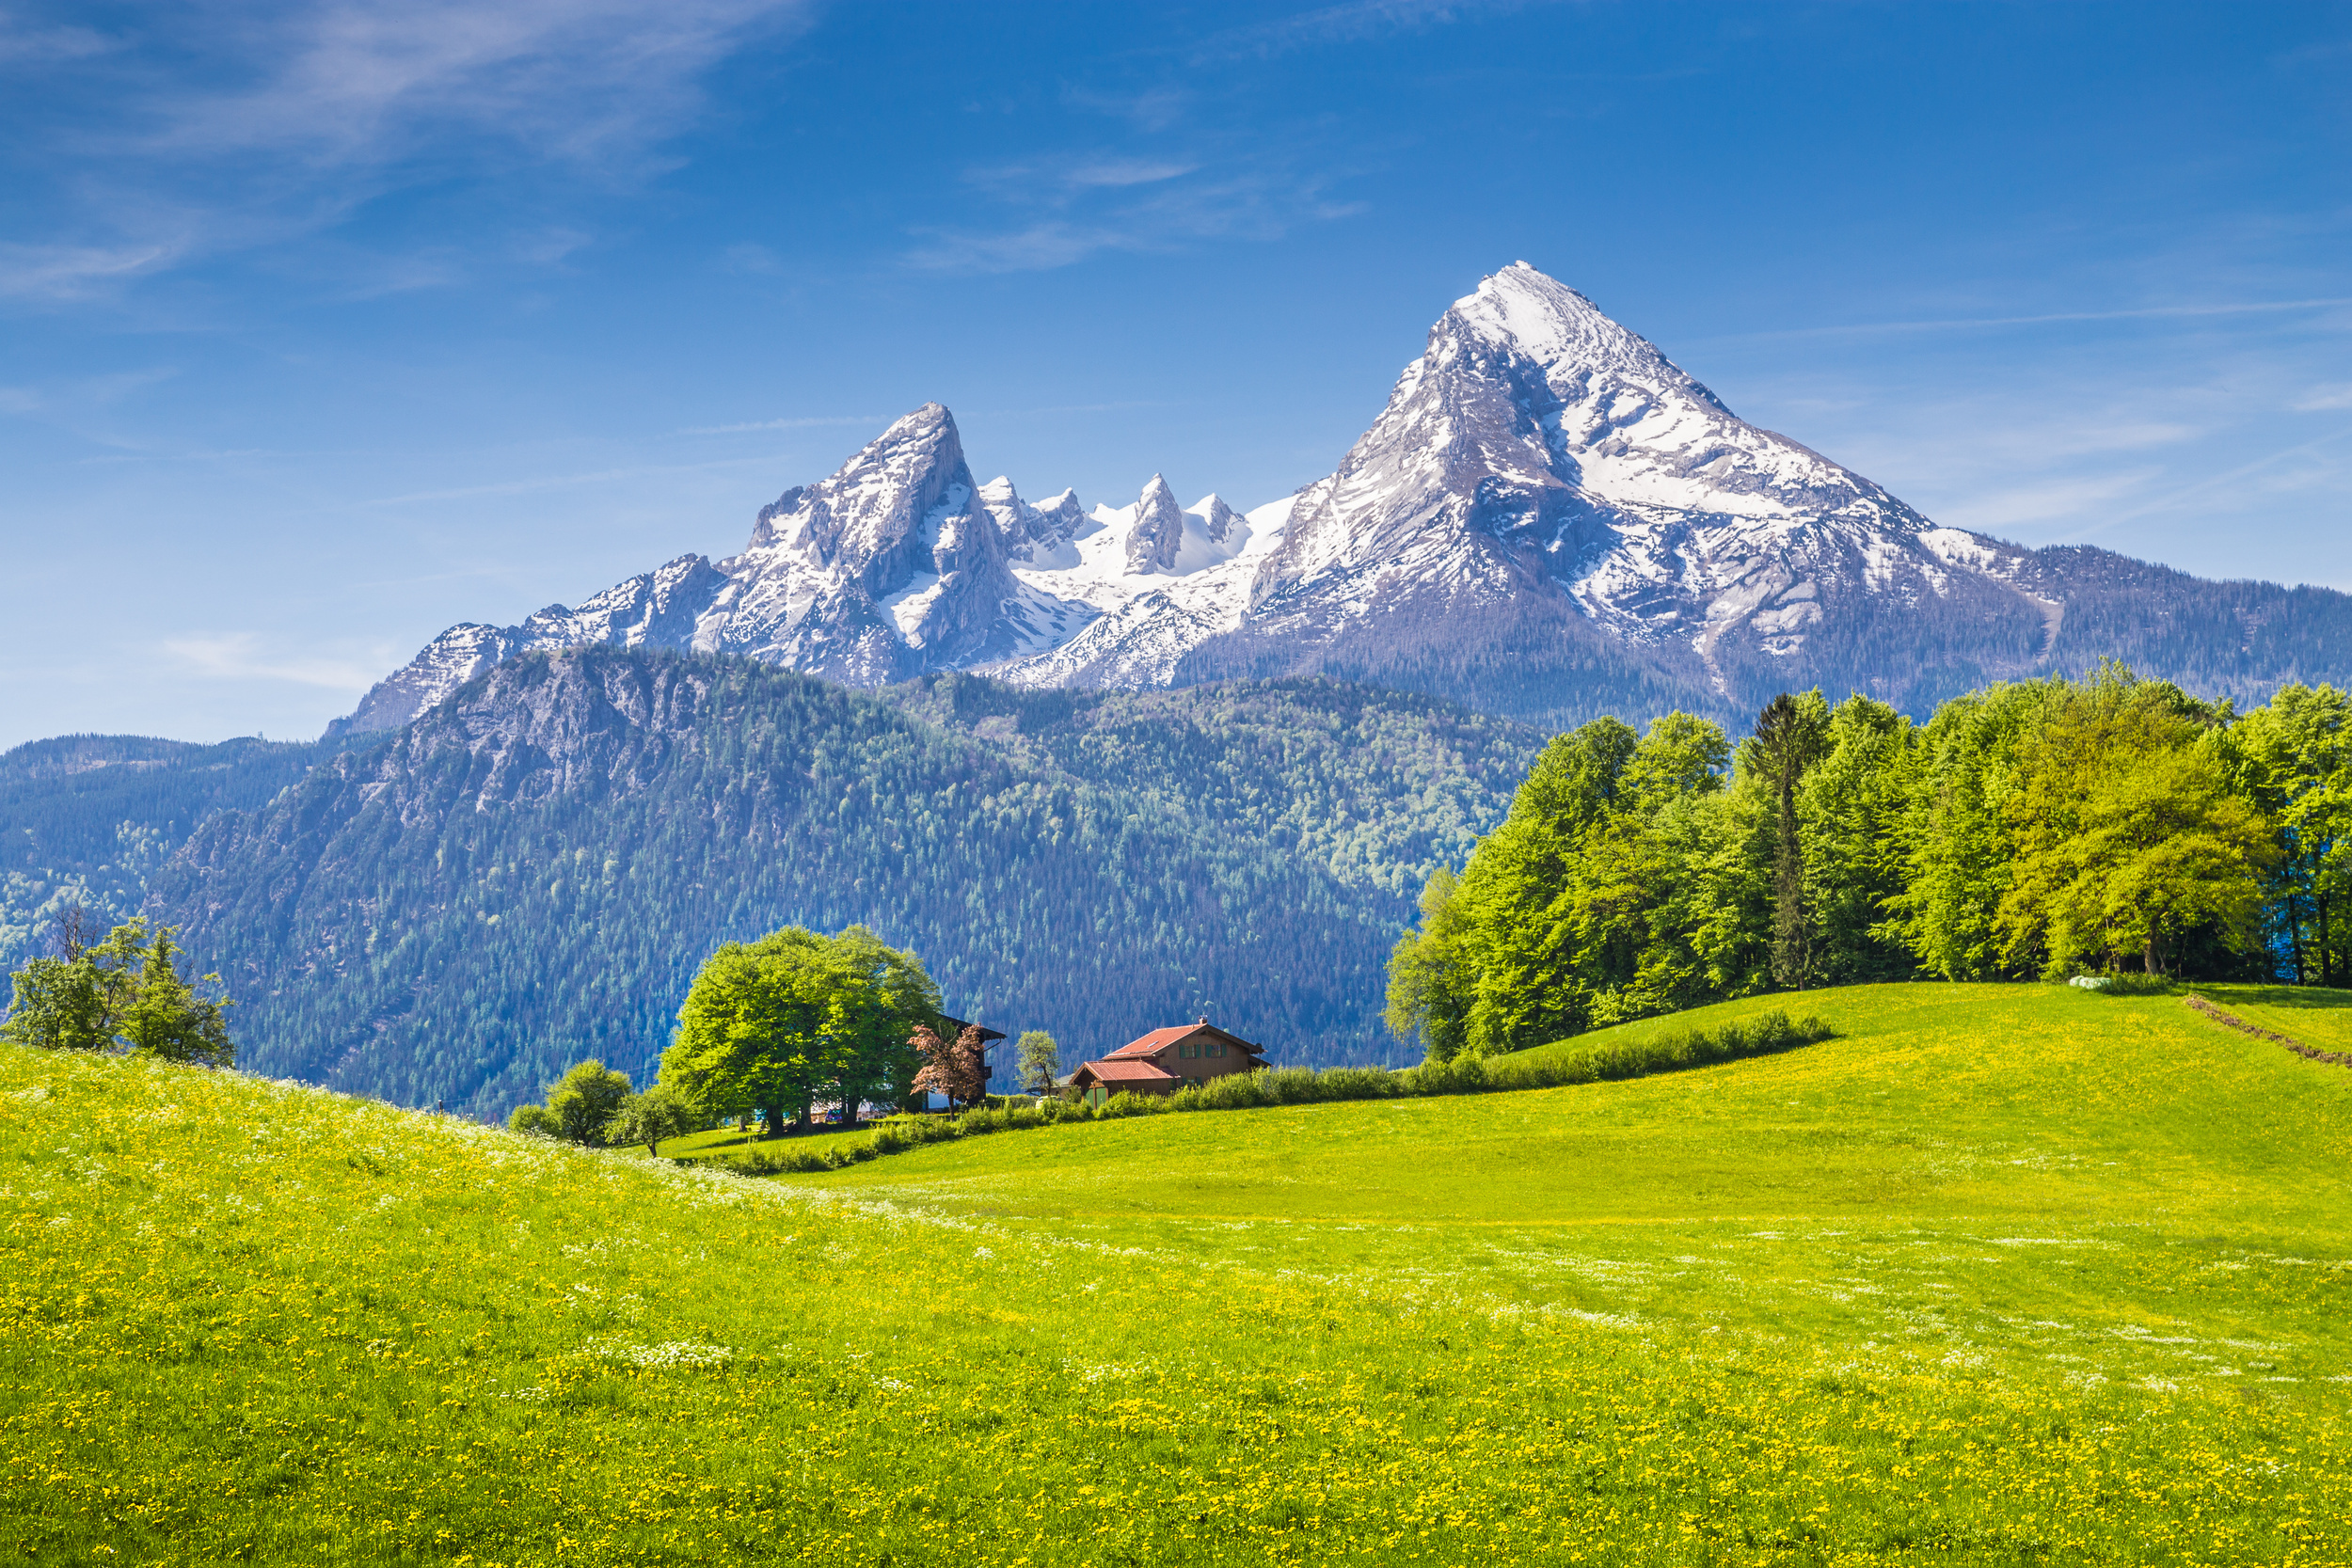 <p>The Bavarian Alps are unlike any other part of Germany and make a great day trip from Munich. You can take a gondola up Germany’s highest point, the Zugspitze, hike or ski the trails, or just enjoy lake views. Bonus — don’t forget to visit the Neuschwanstein Castle on the way back to the city. </p><p>You may also like: <a href='https://www.yardbarker.com/lifestyle/articles/20_tips_for_growing_a_thriving_herb_garden/s1__38937070'>20 tips for growing a thriving herb garden</a></p>